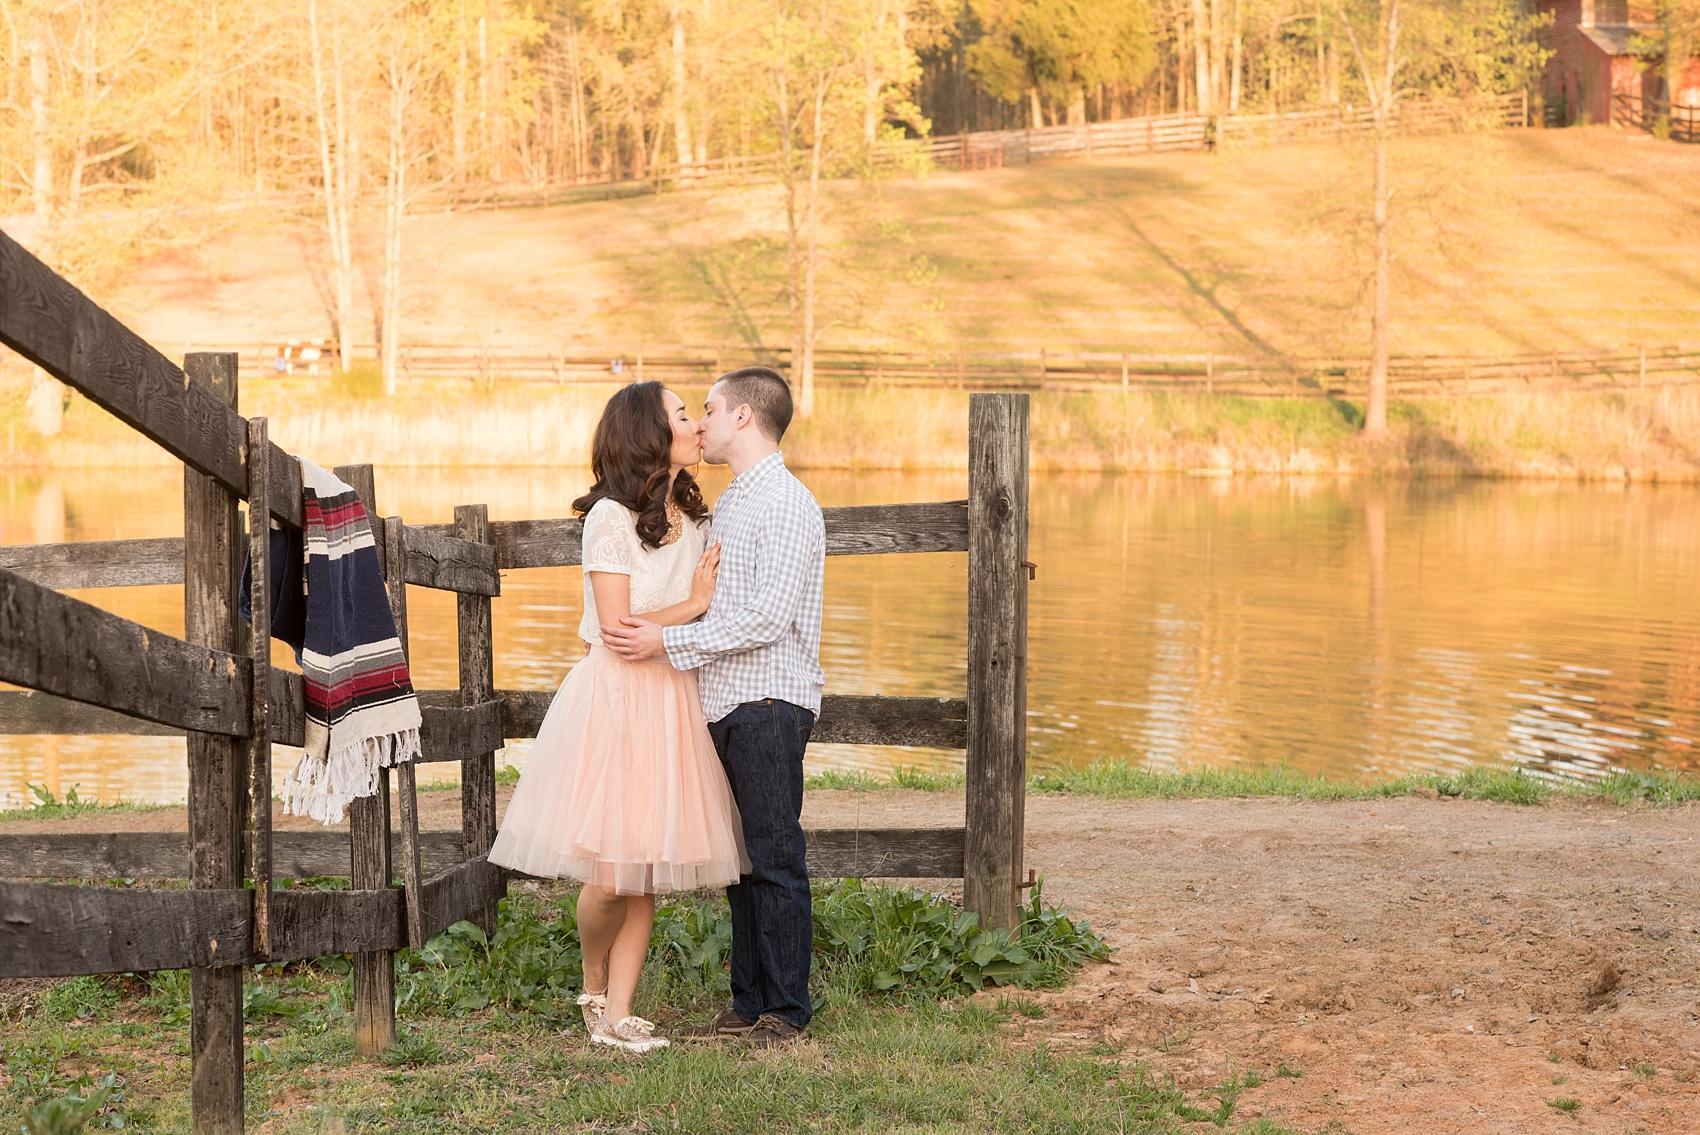 Raleigh farm engagement photos during spring by the lake. Images by Mikkel Paige Photography.